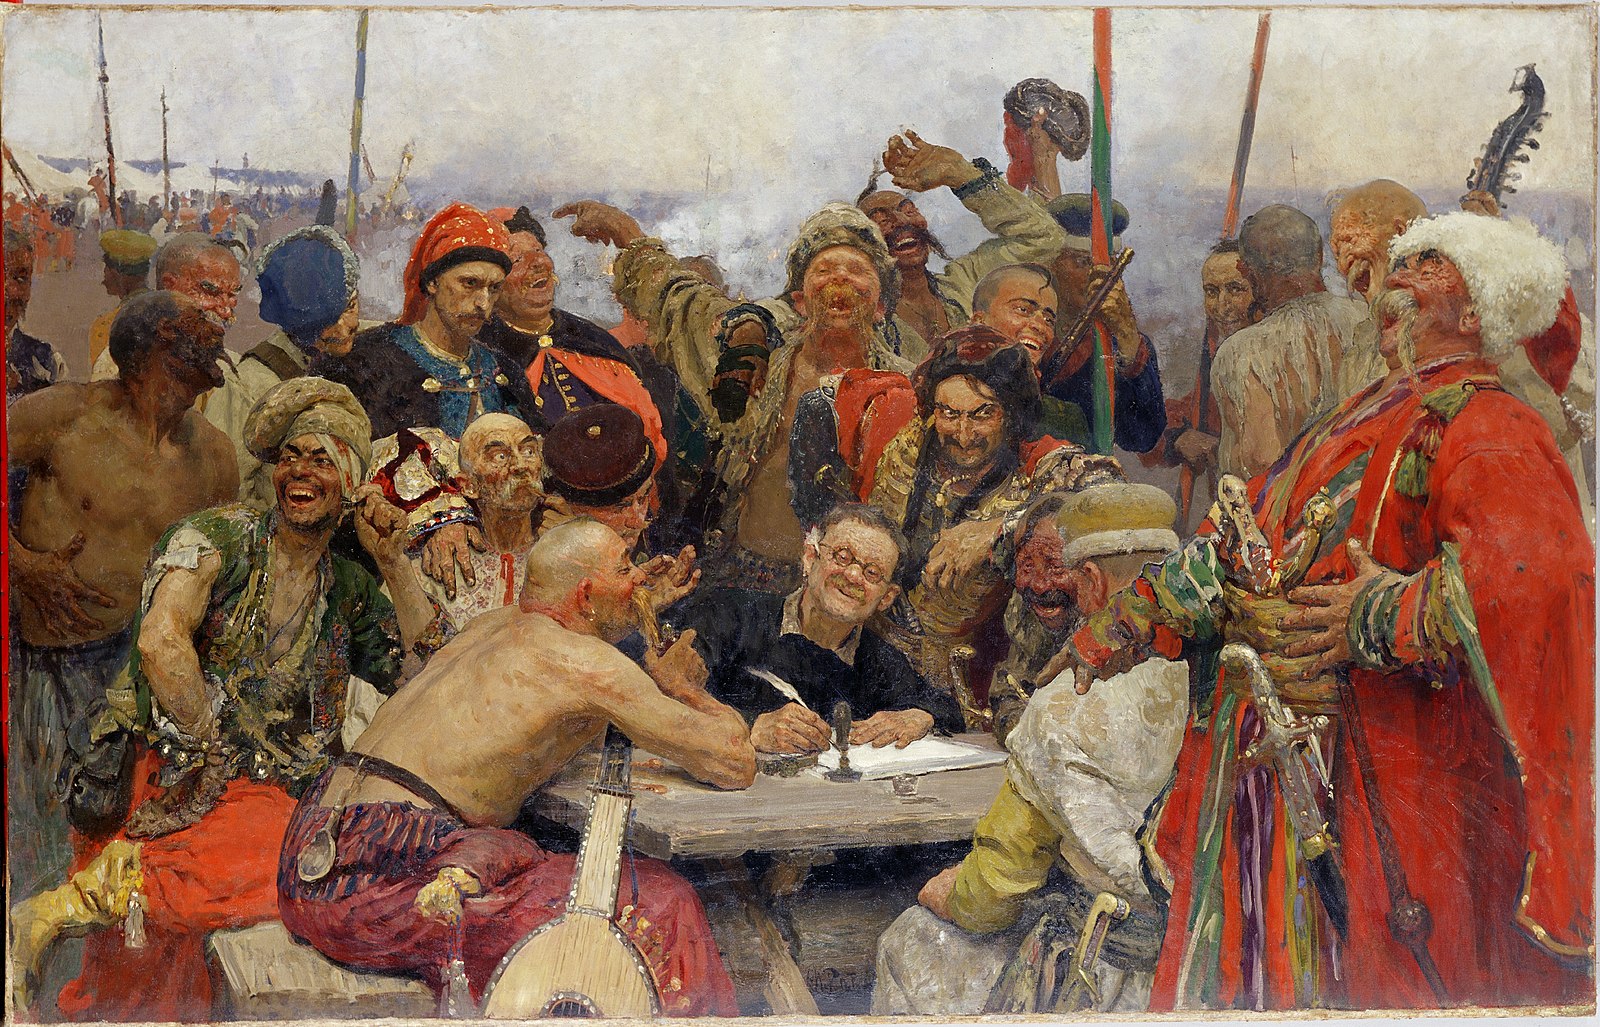 The Reply of the Zaporozhian Cossacks to the Sultan of Turkey by Ilya Repin, 1893.